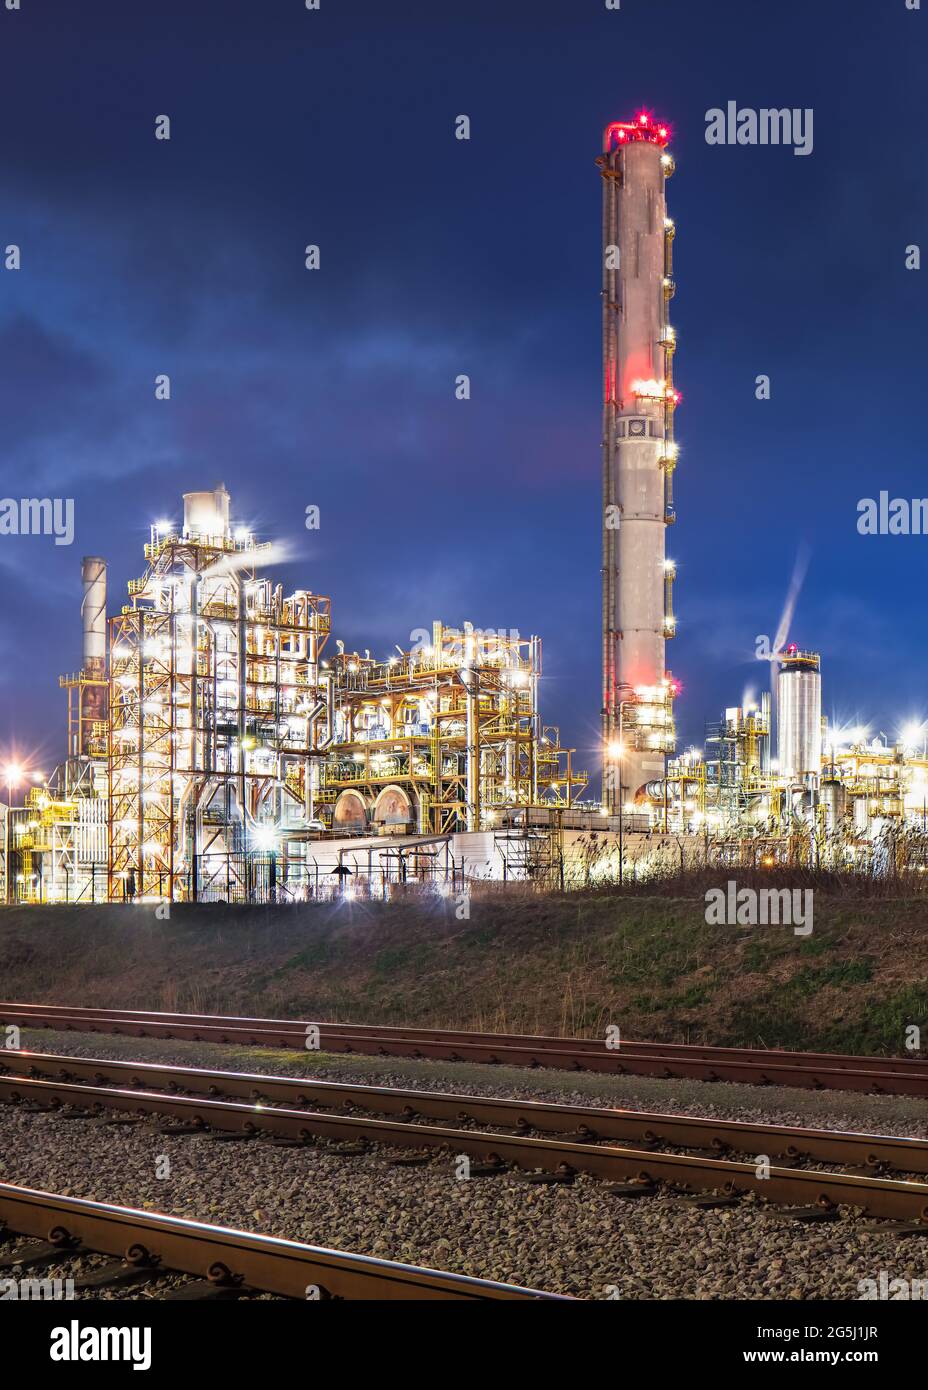 Night scene with illuminated petrochemical production plant with tracks, Port of Antwerp Stock Photo